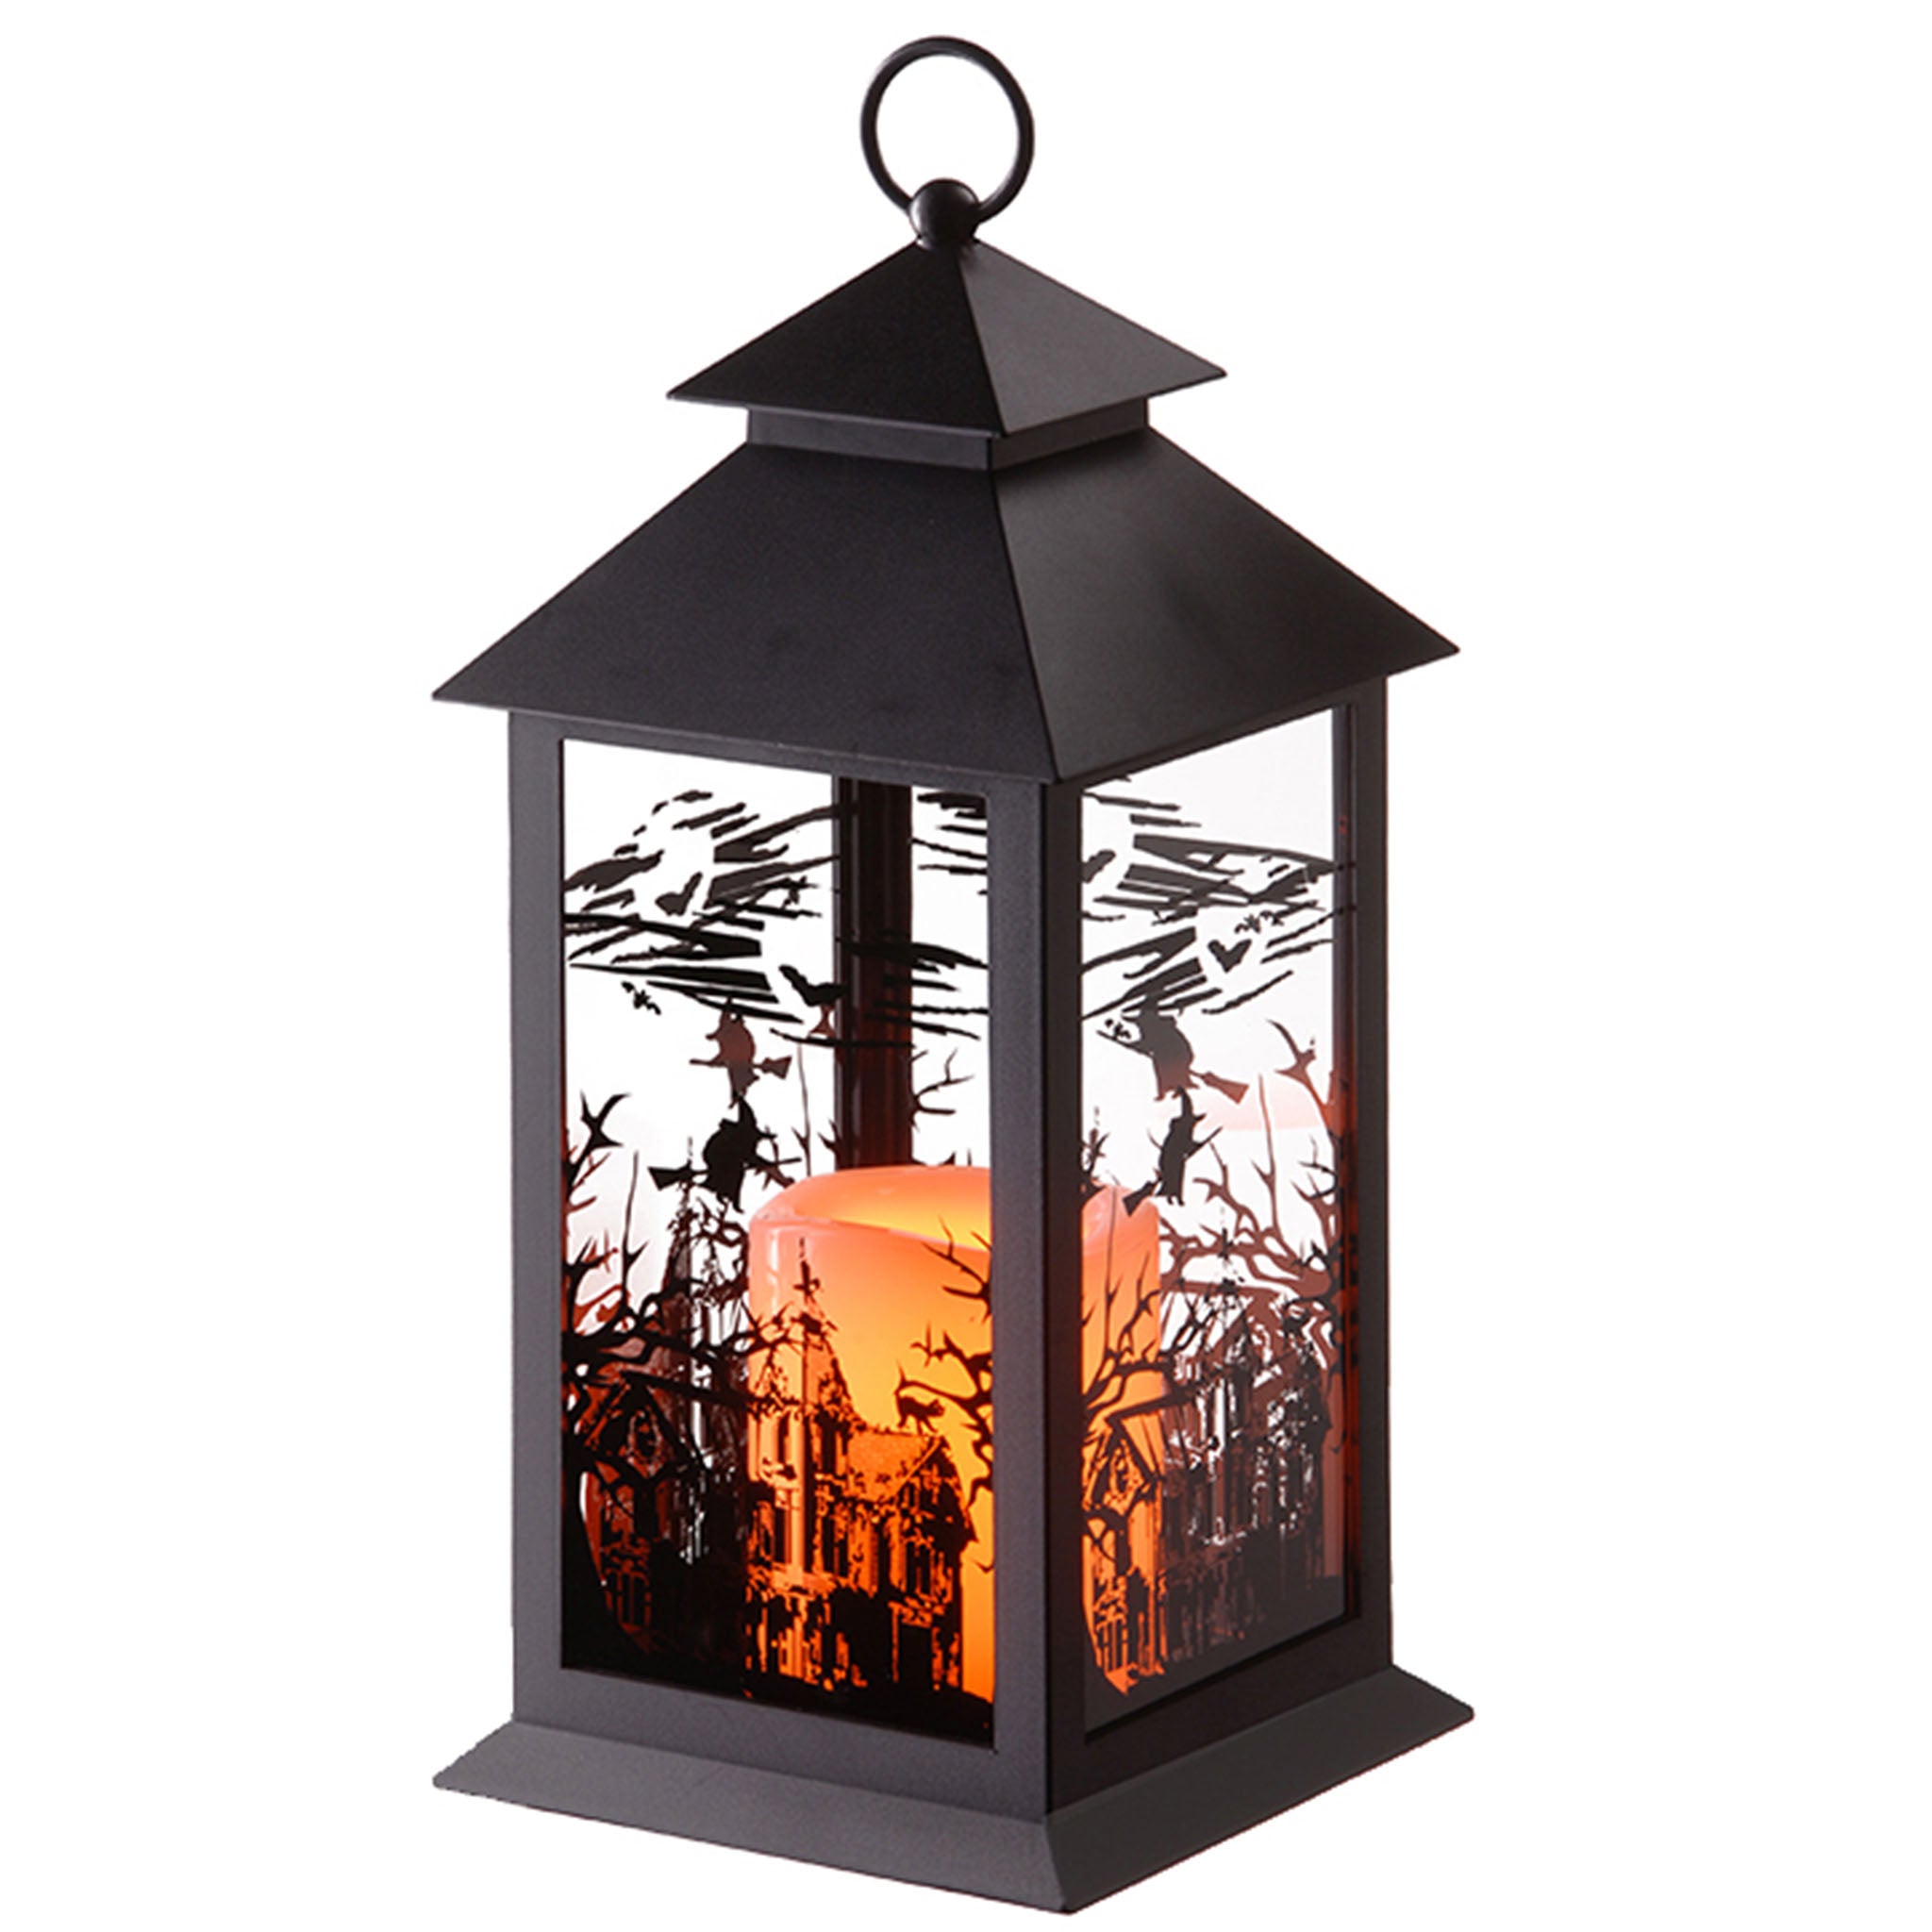 Halloween Lantern with LED Lights, Carved Images of Witches, Haunted House, 12 inches